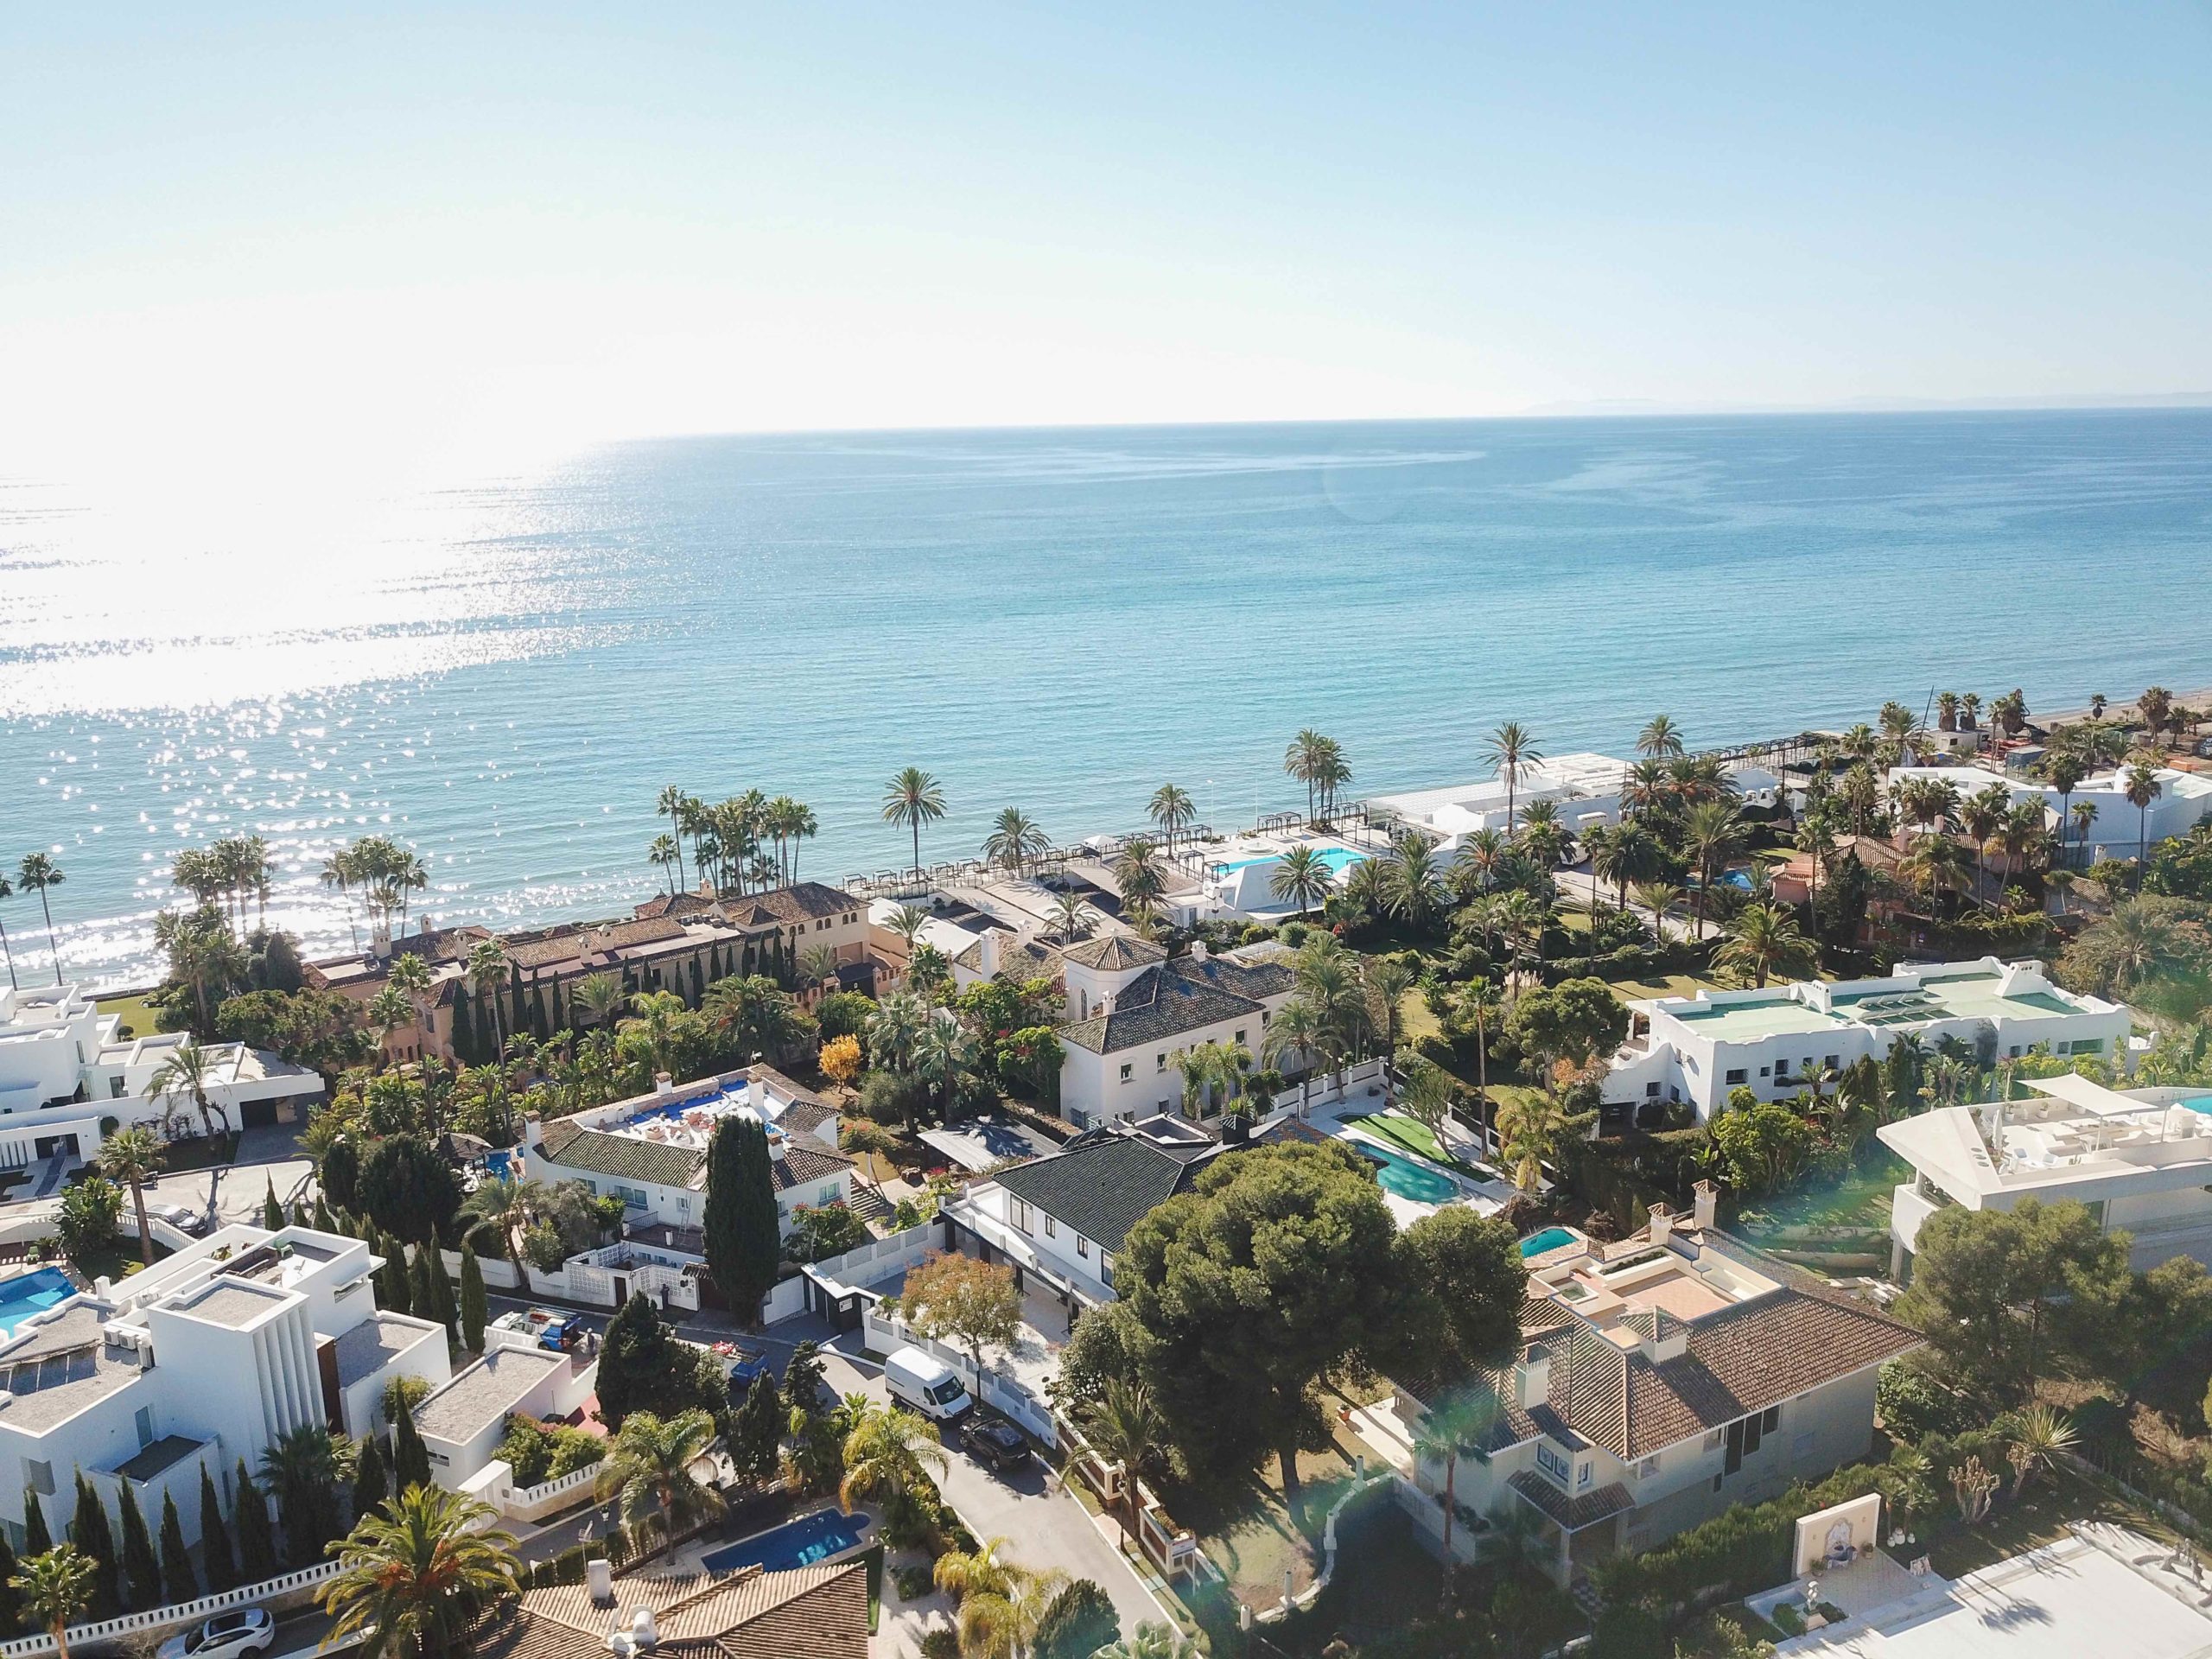 A aerial view of Los Monteros  with sea views in the background